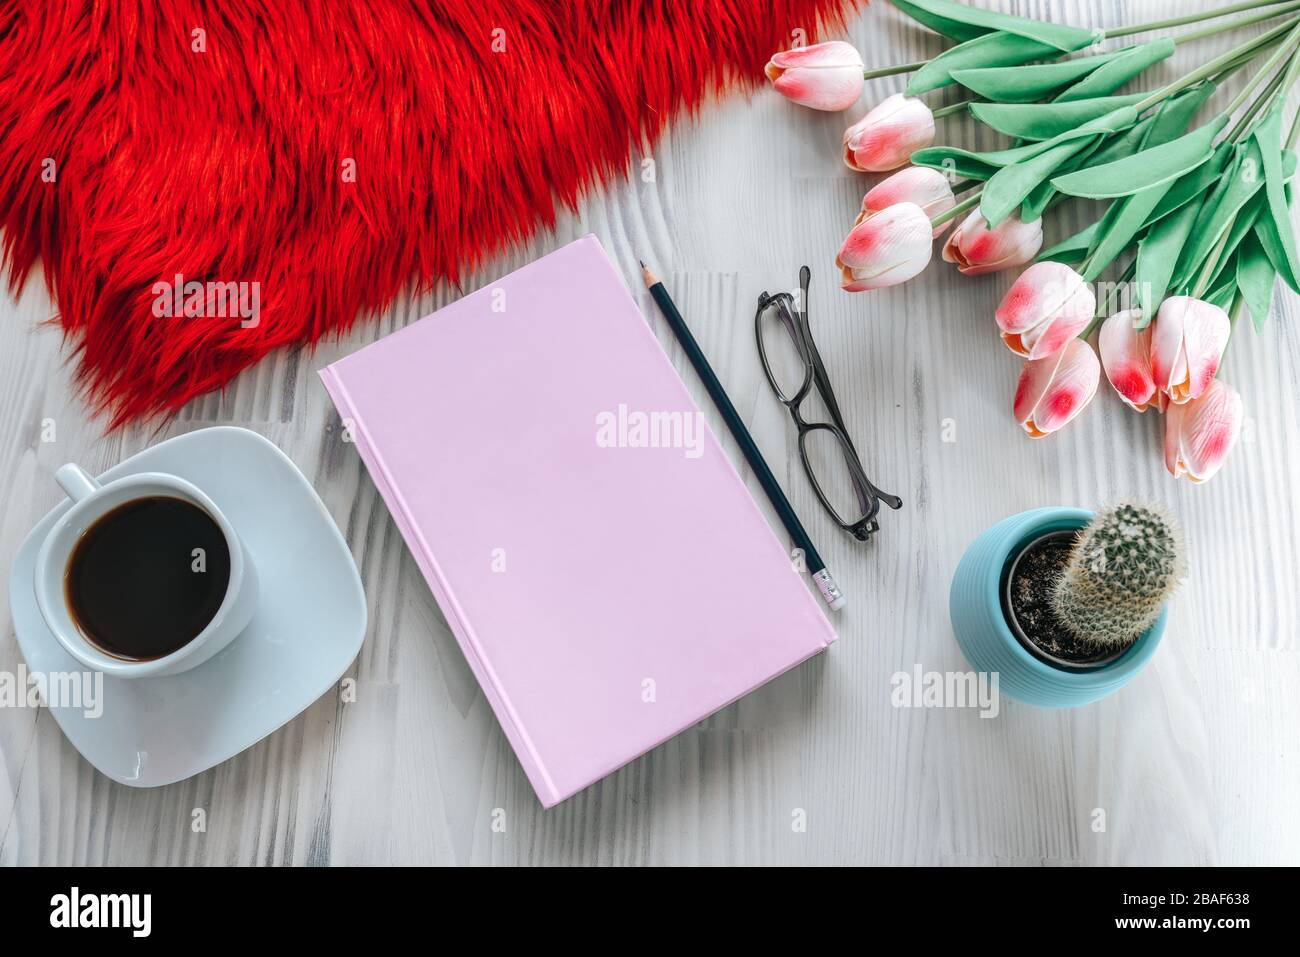 Pencil and a pink covered notebook on white wooden table. Bird eye view, mock-up concept Stock Photo